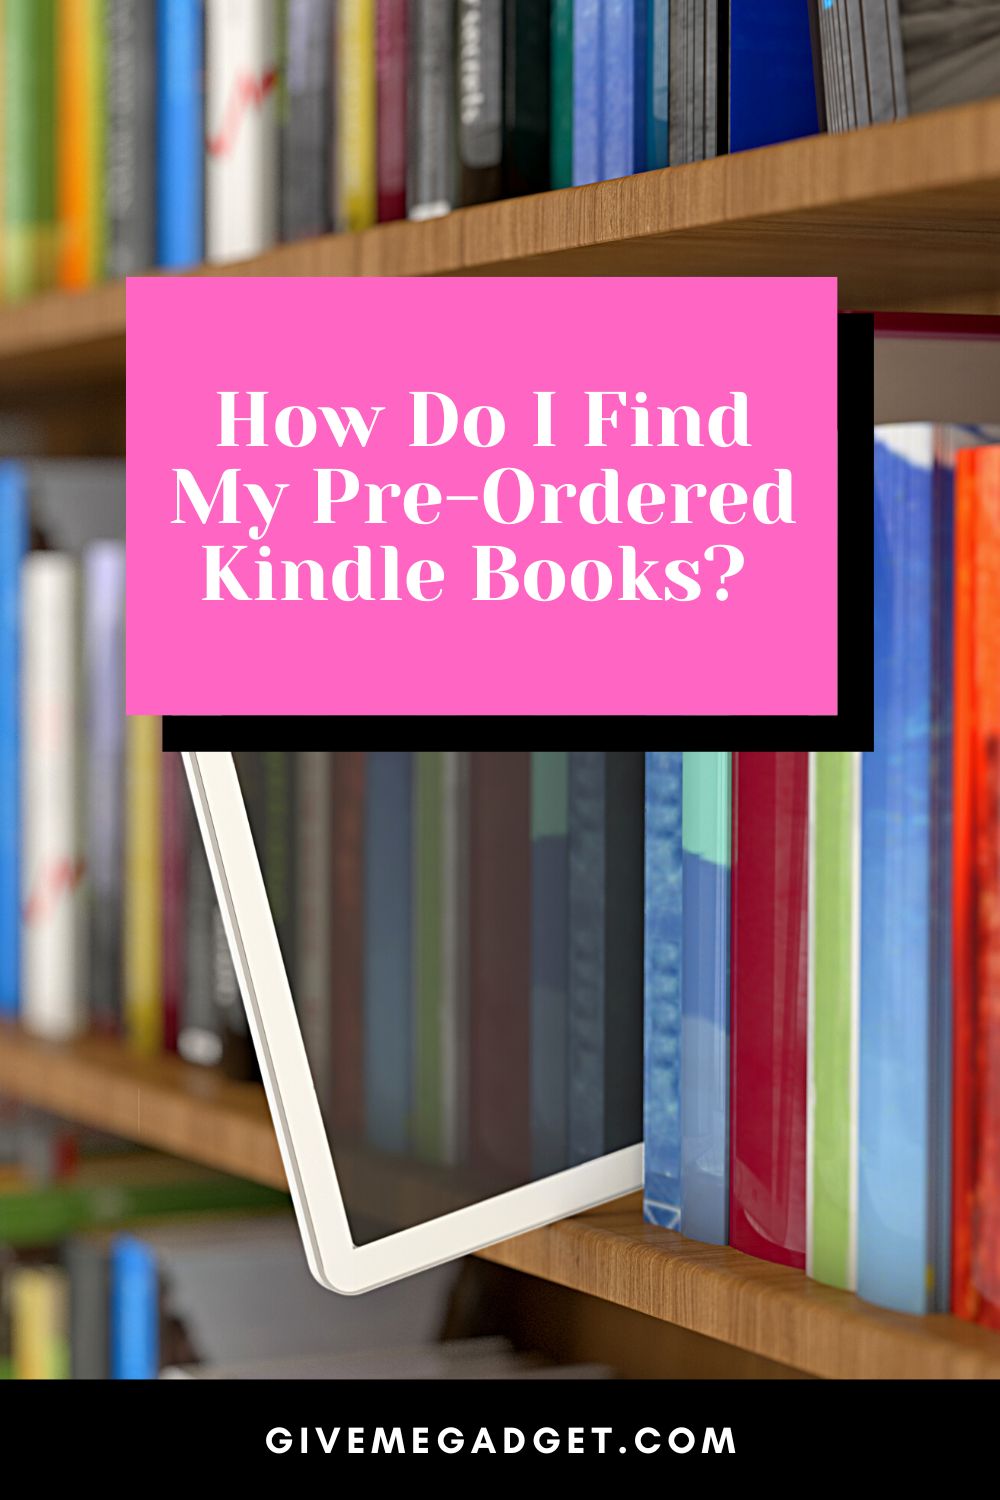 How Do I Find My Pre-Ordered Kindle Books?